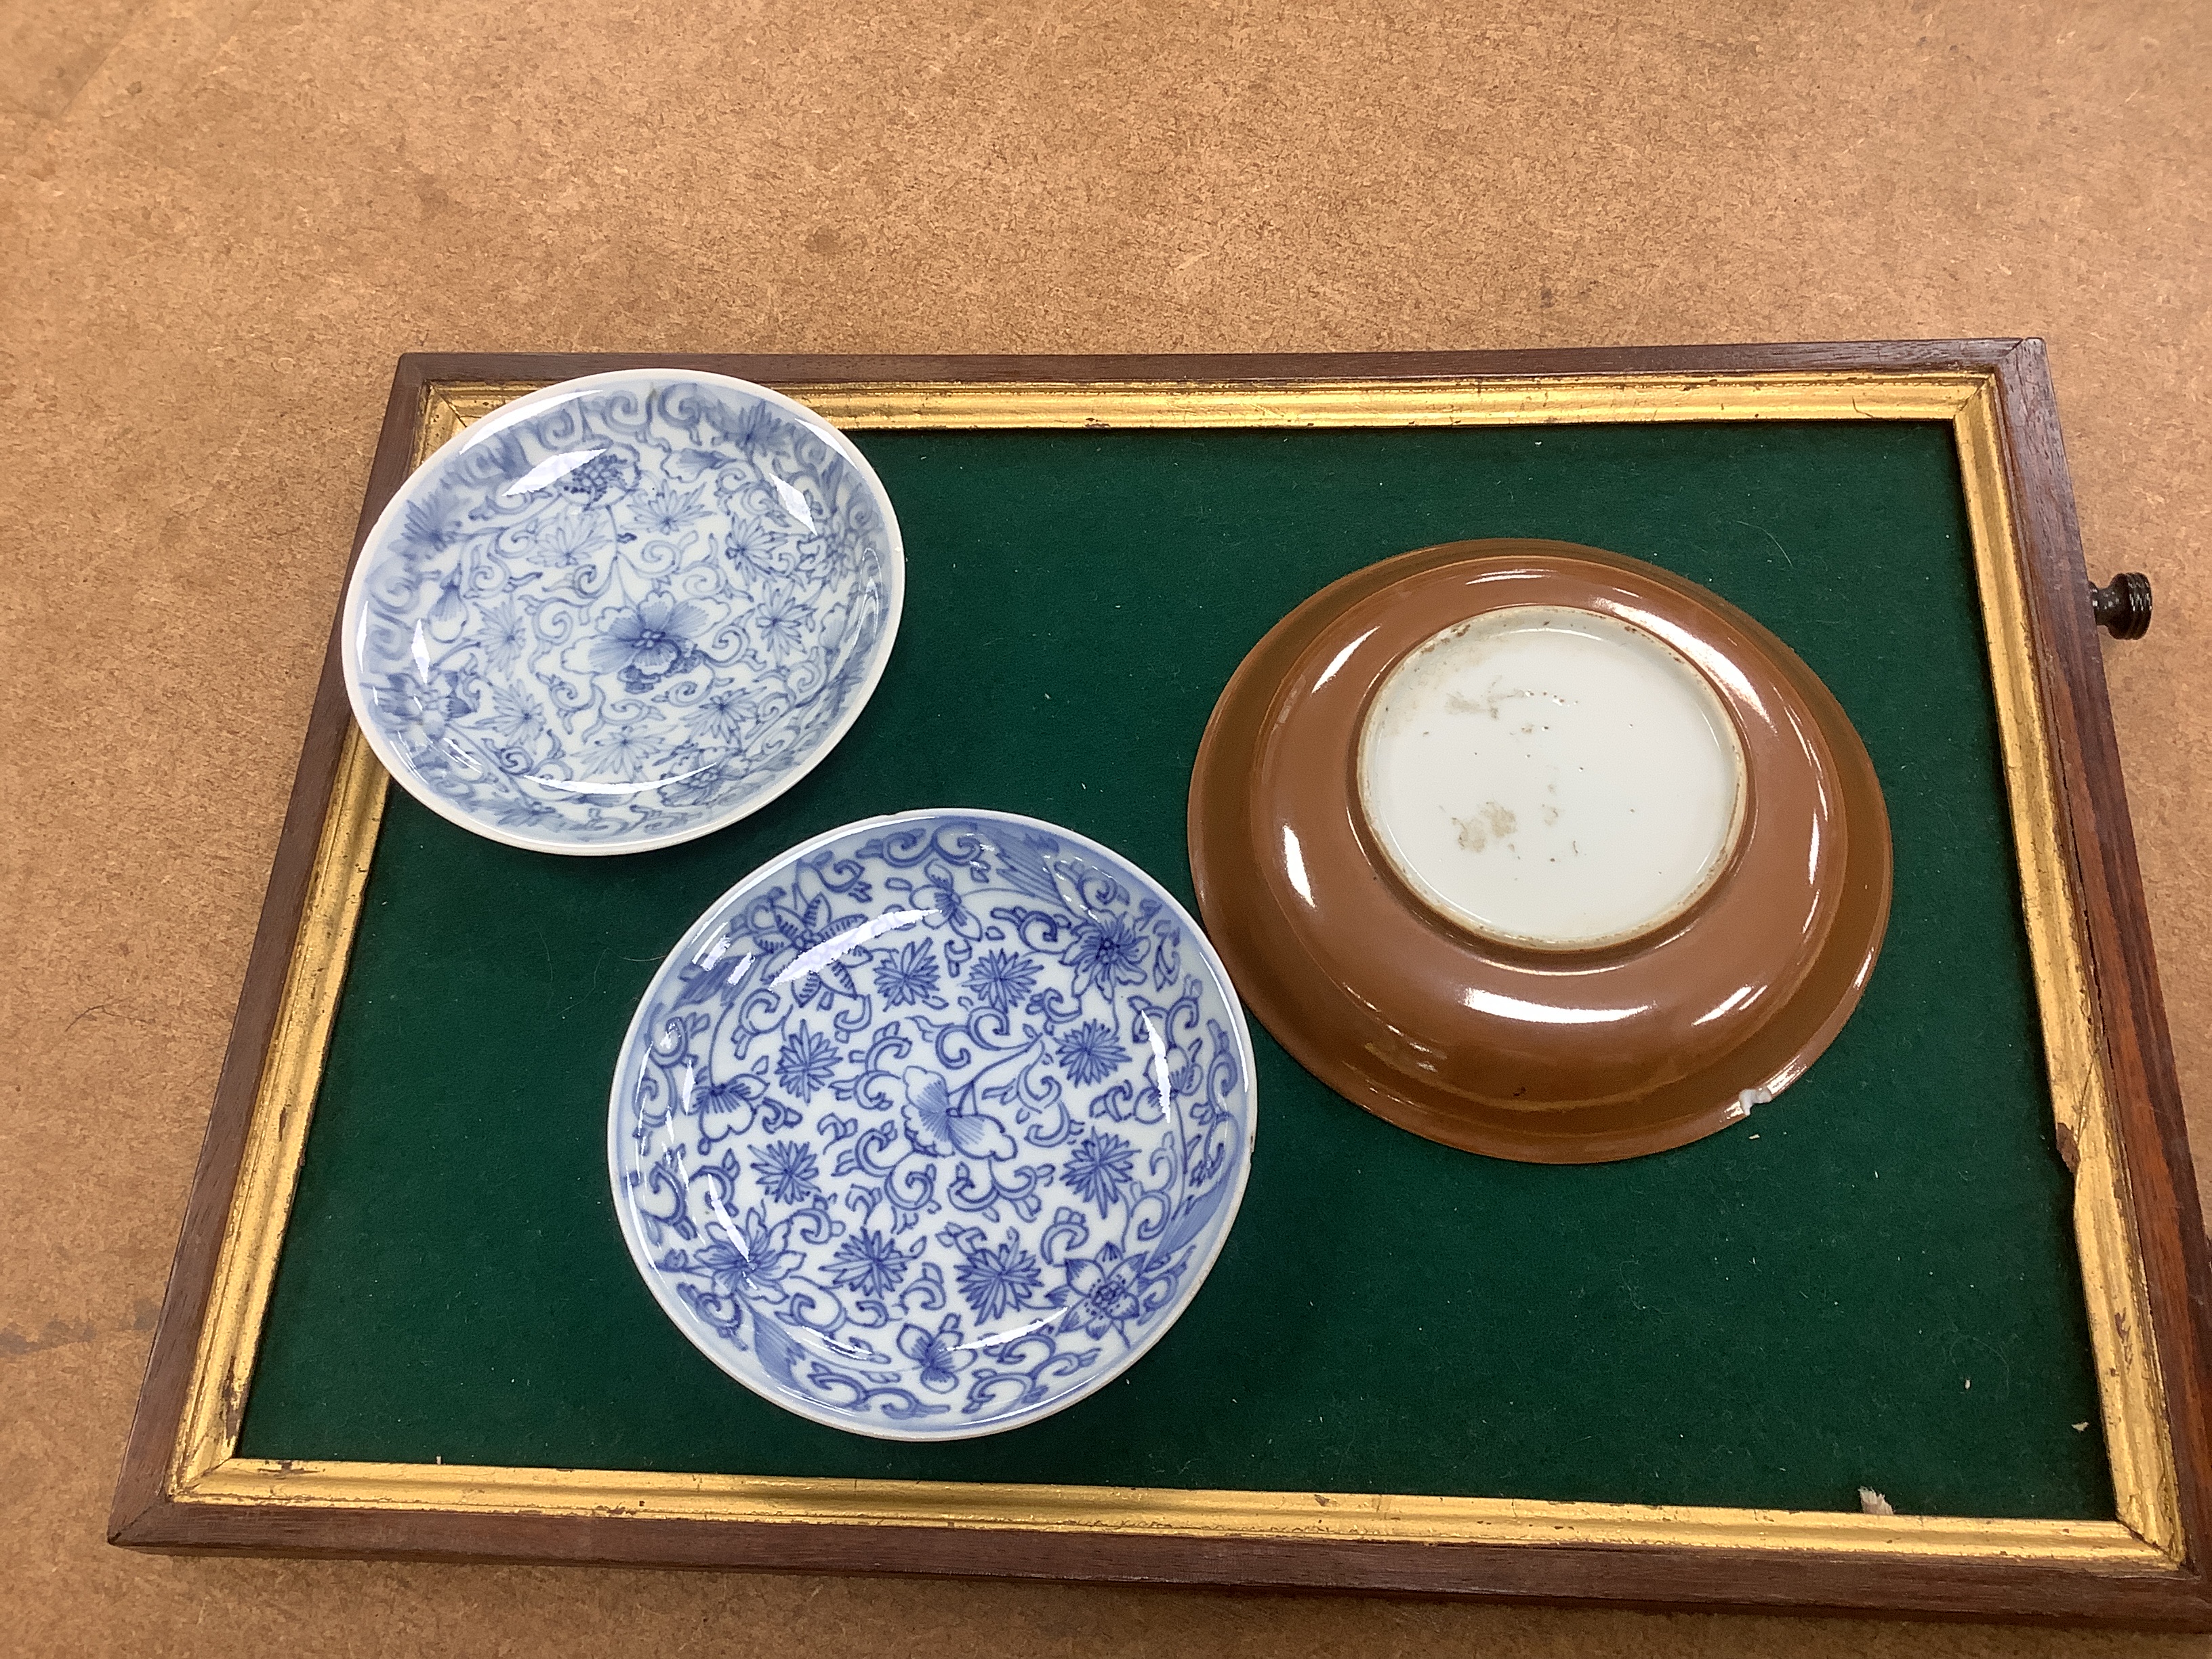 A set of six Chinese blue and white tea bowls and saucers, Kangxi period, a Chinese famille rose tea bowl and saucer, a Batavia ware saucer, both 18th century and Japanese ceramics